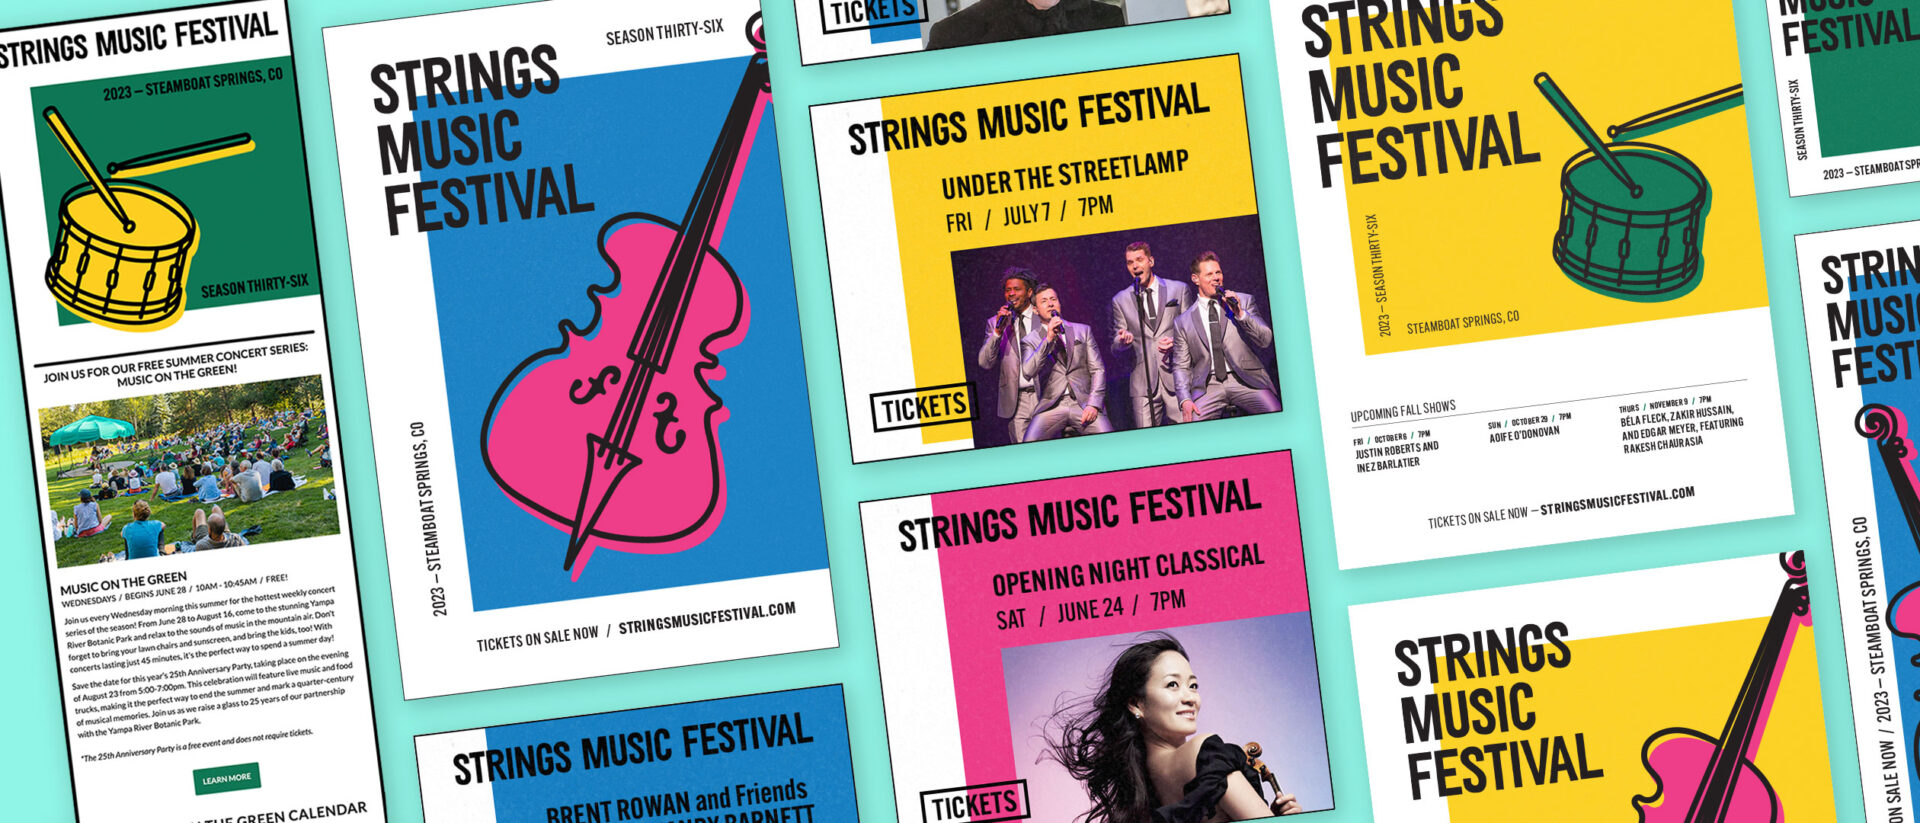 Strings music festival program layout with colorful instrument illustrations